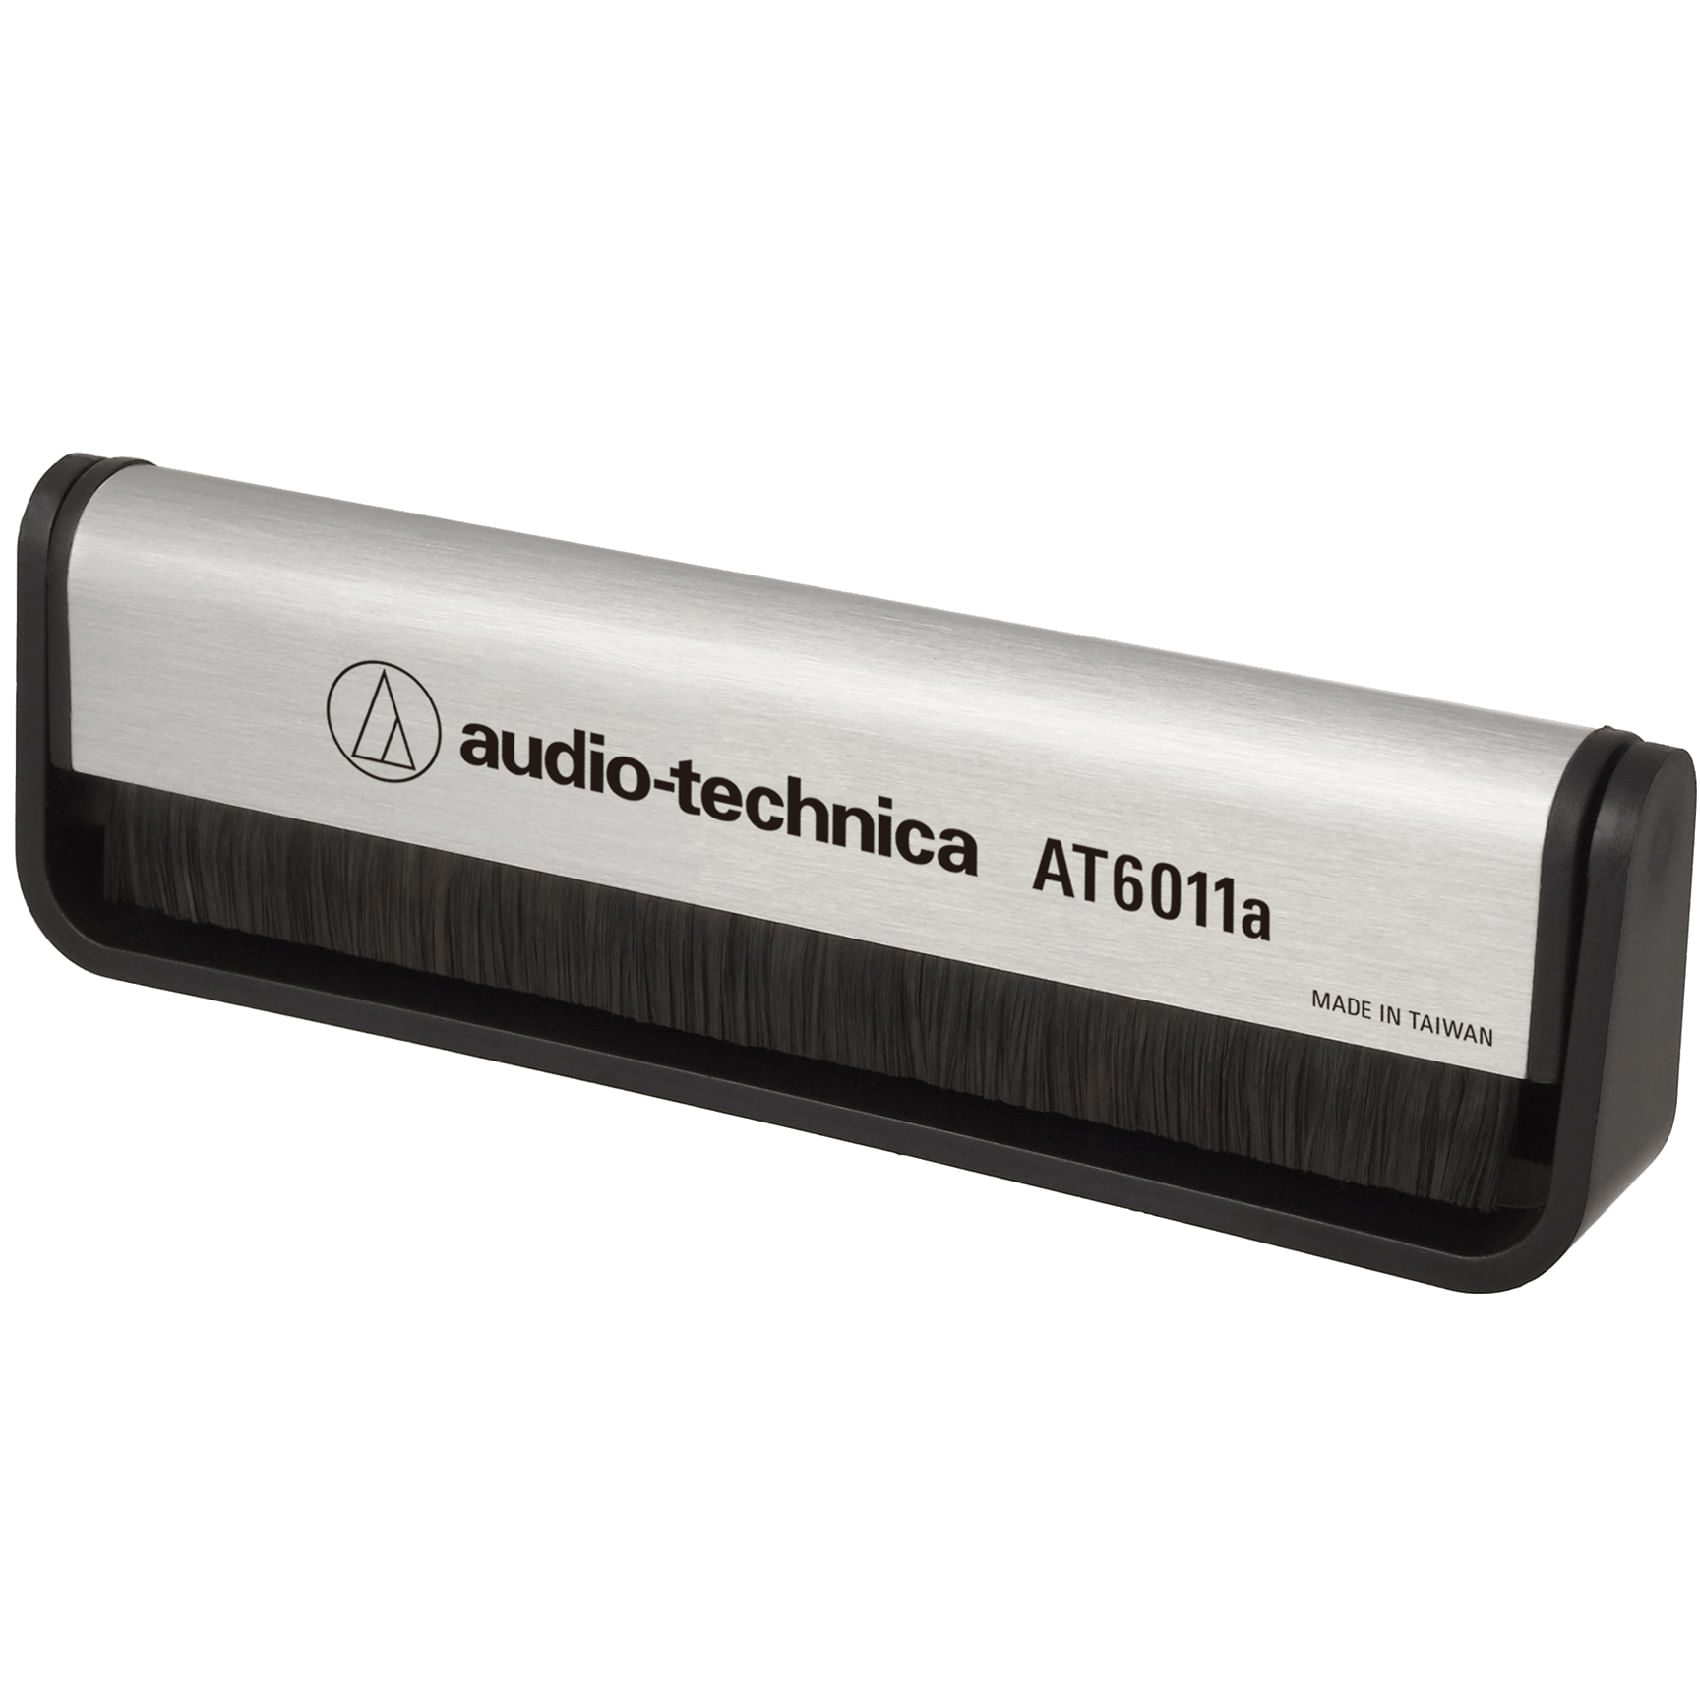 View larger image of Audio-Technica AT6011a Anti-Static Record Brush